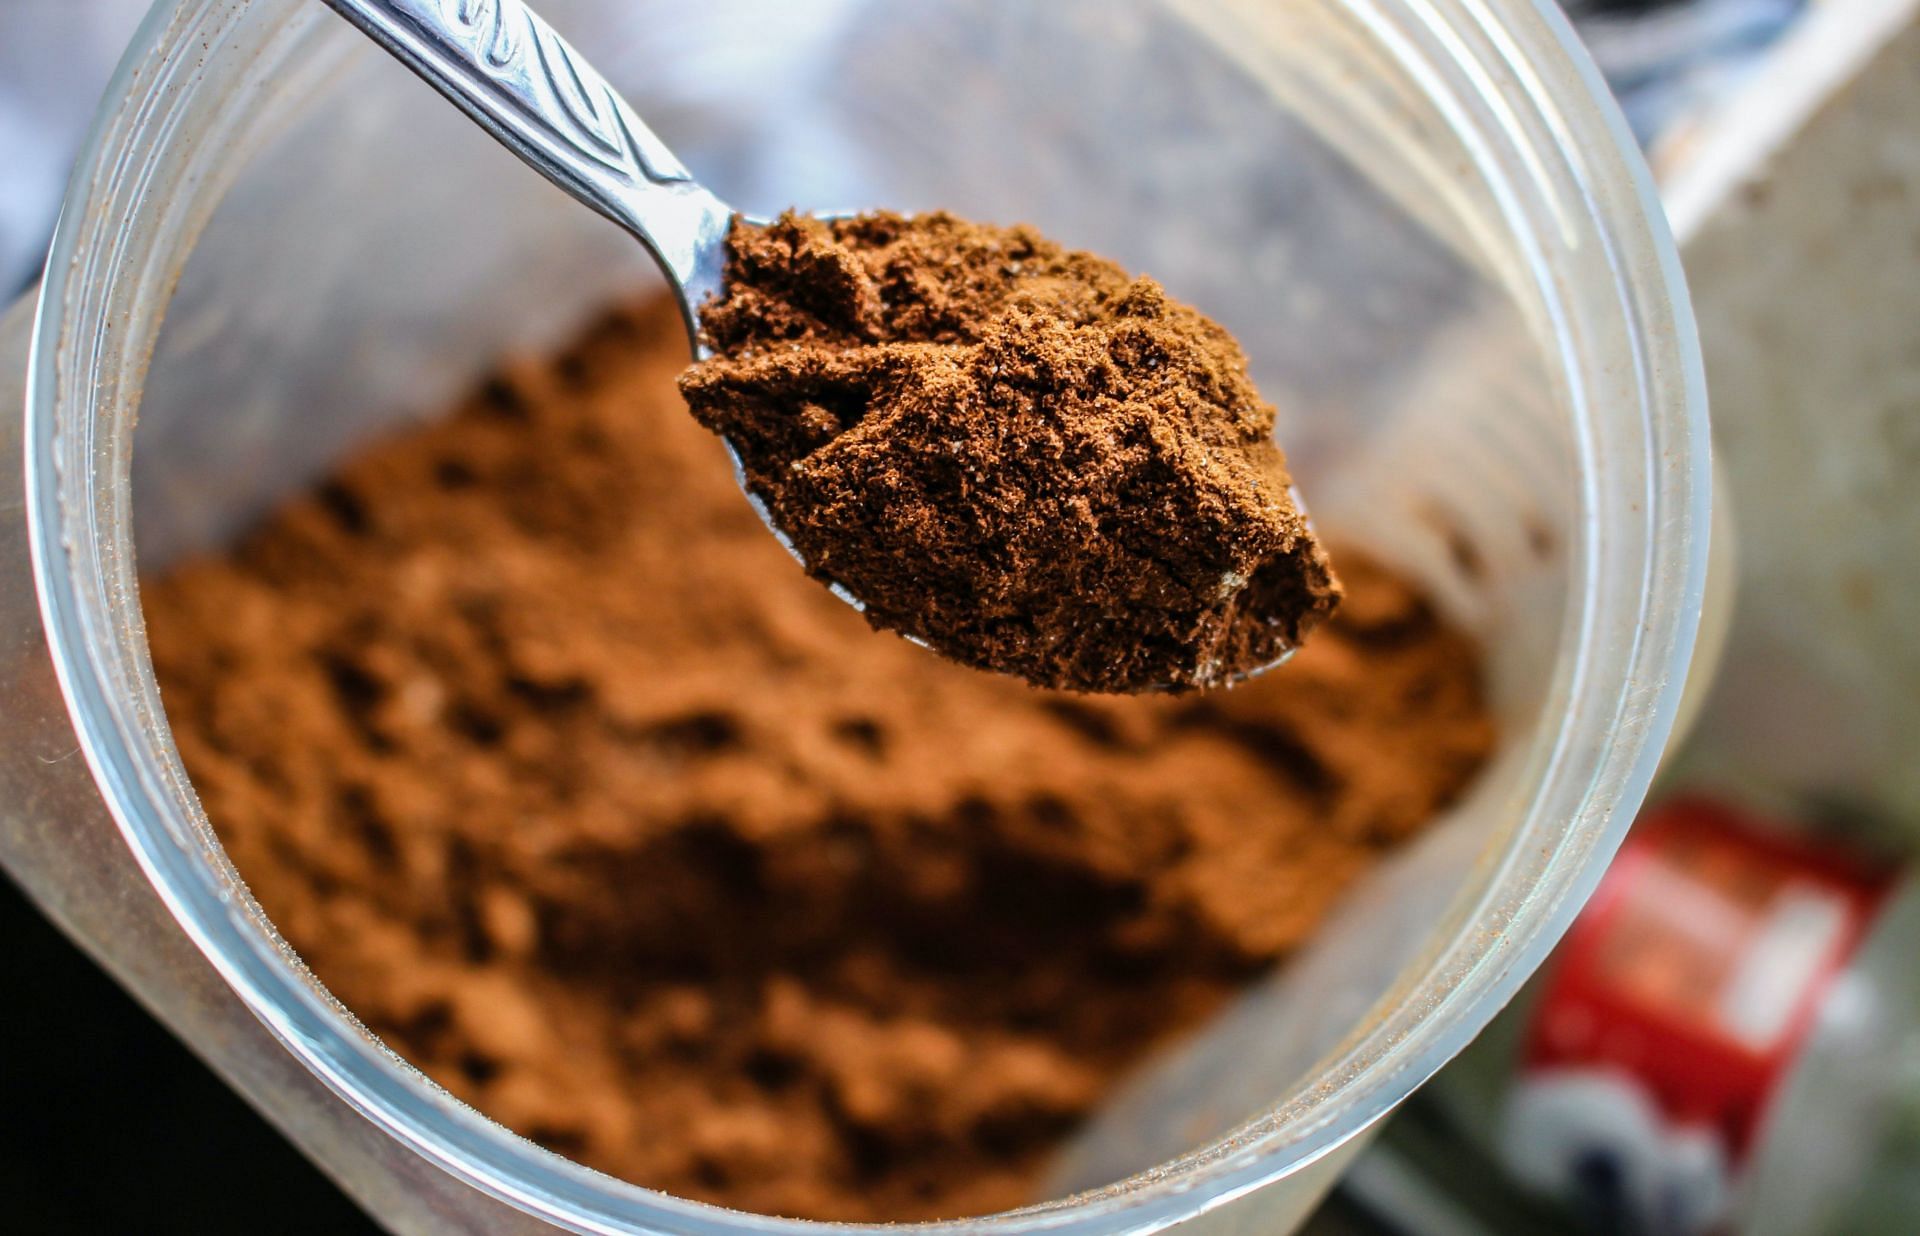 Chocolate is made from cacao seeds. (Image via Pexels/ Samer Daboul)